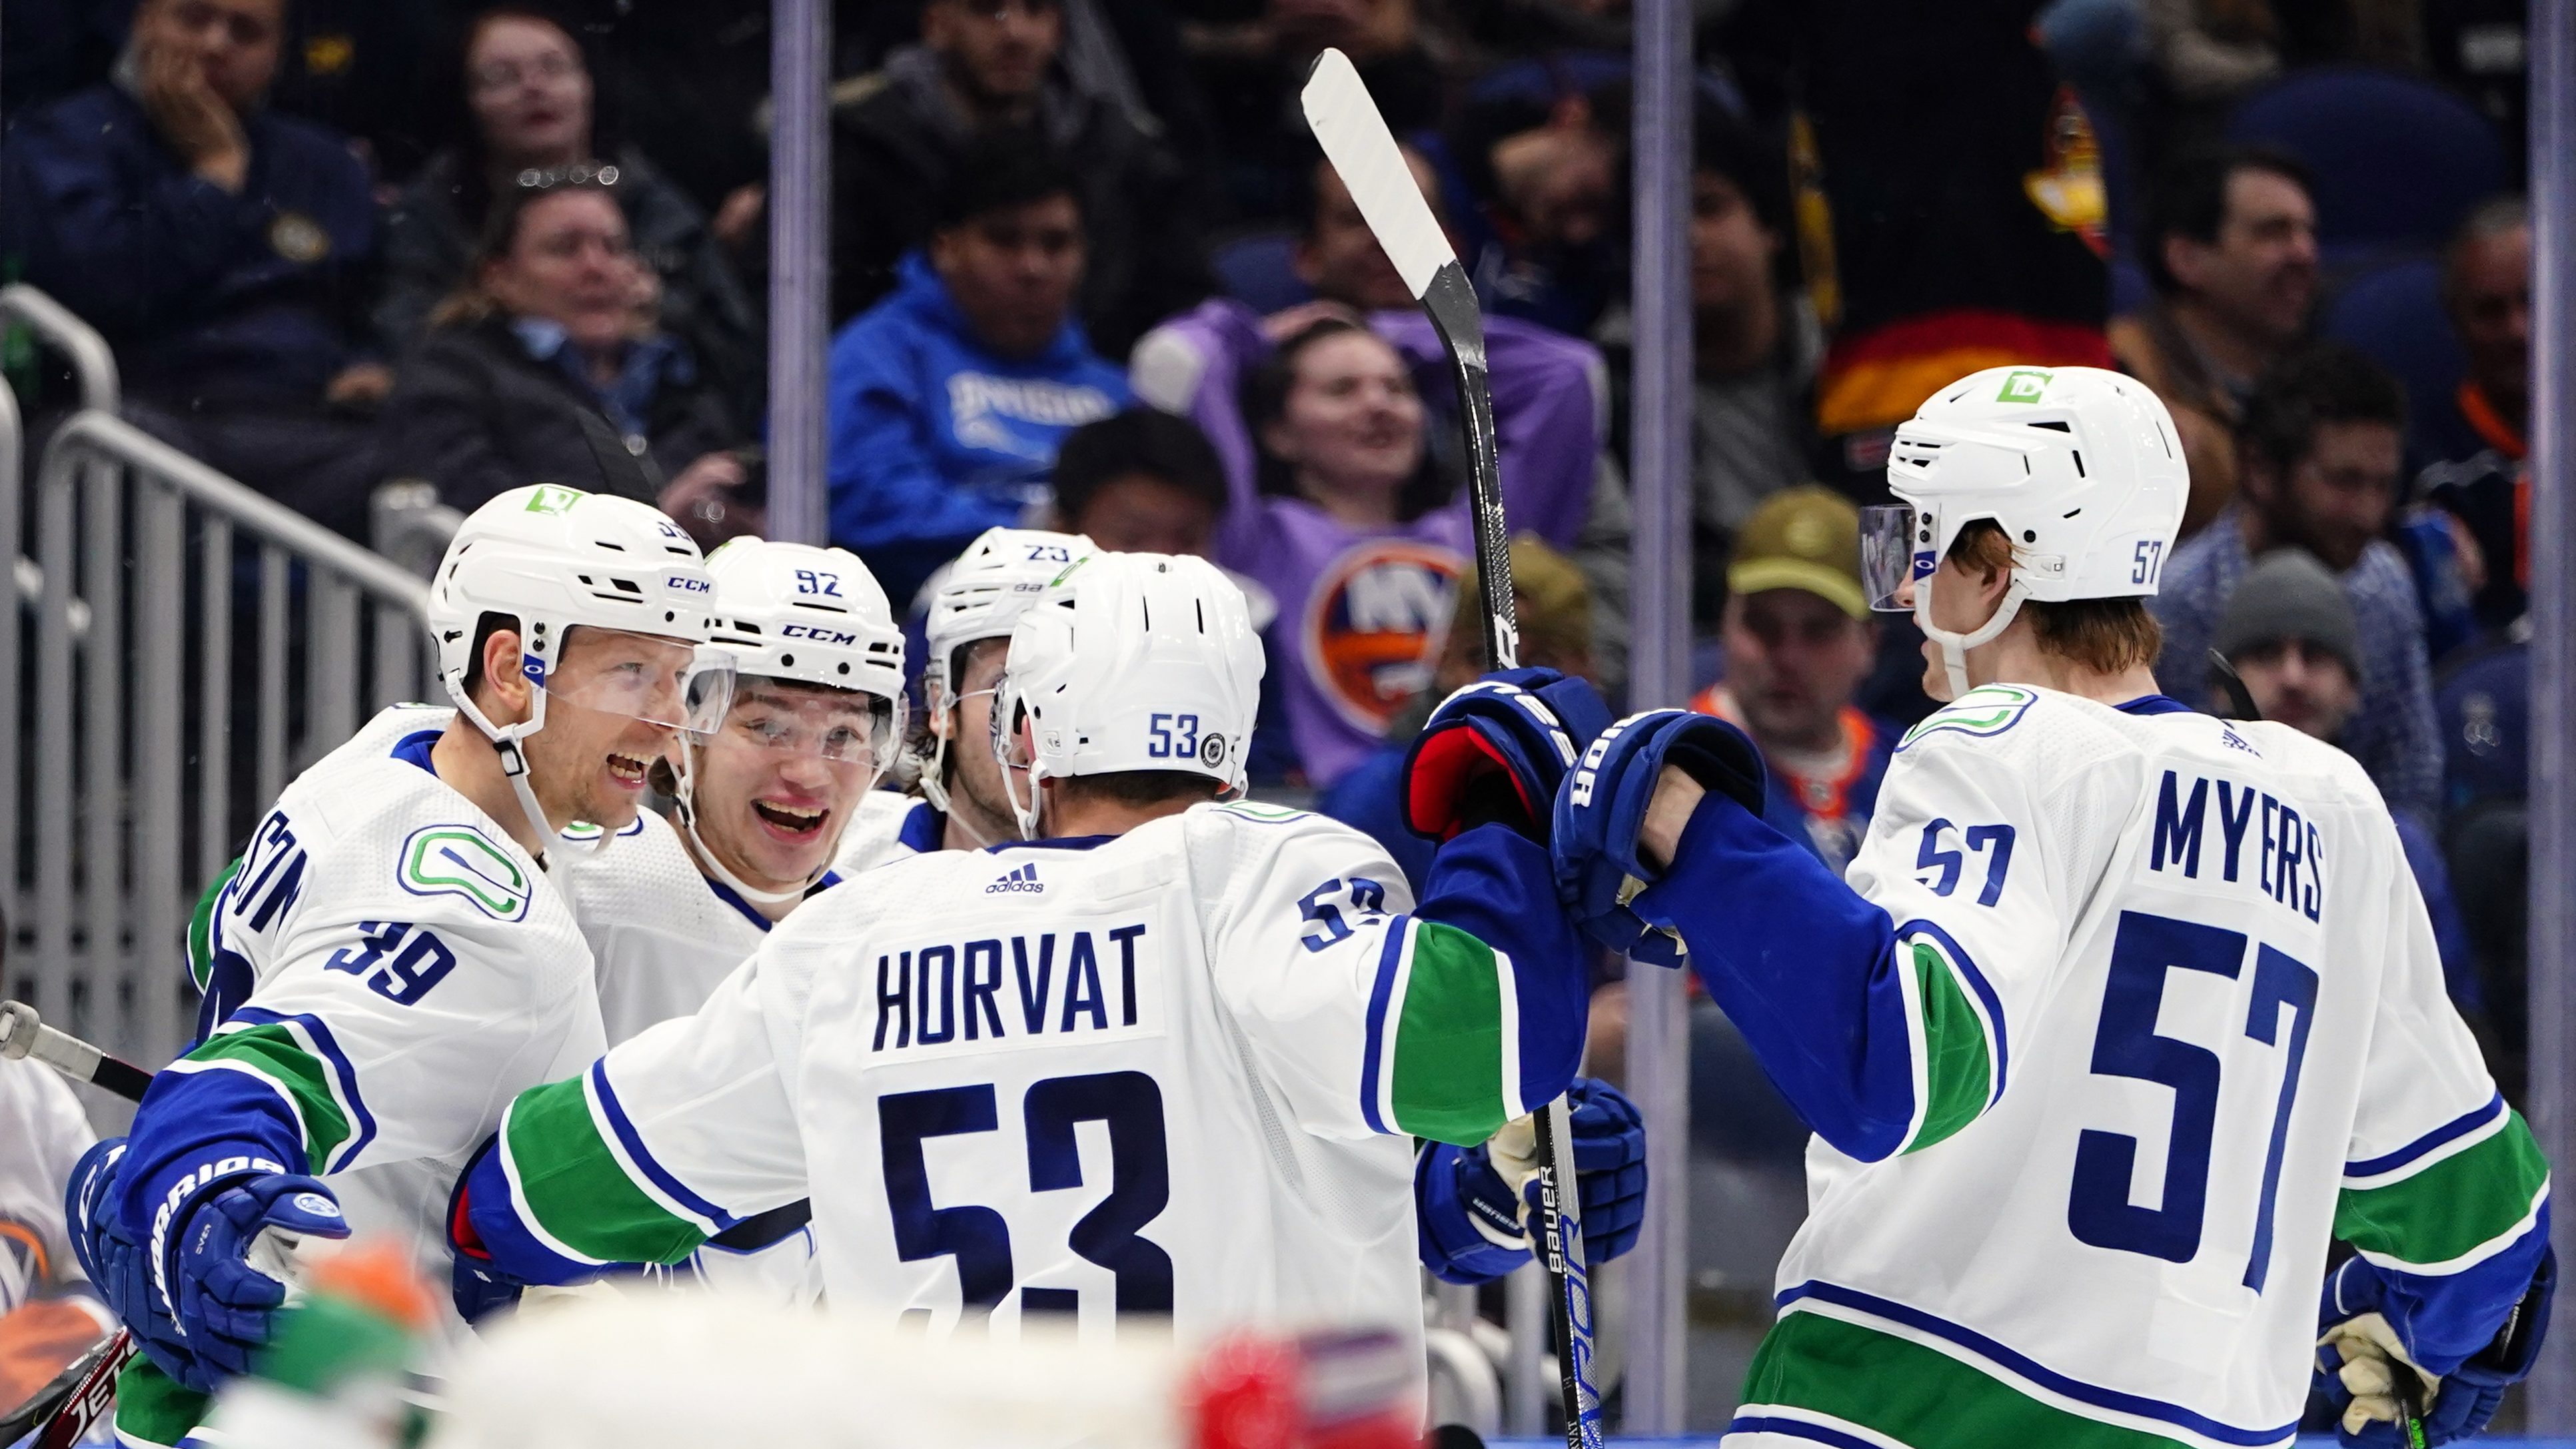 New York Islanders Have Acquired Bo Horvat from the Canucks - BVM Sports